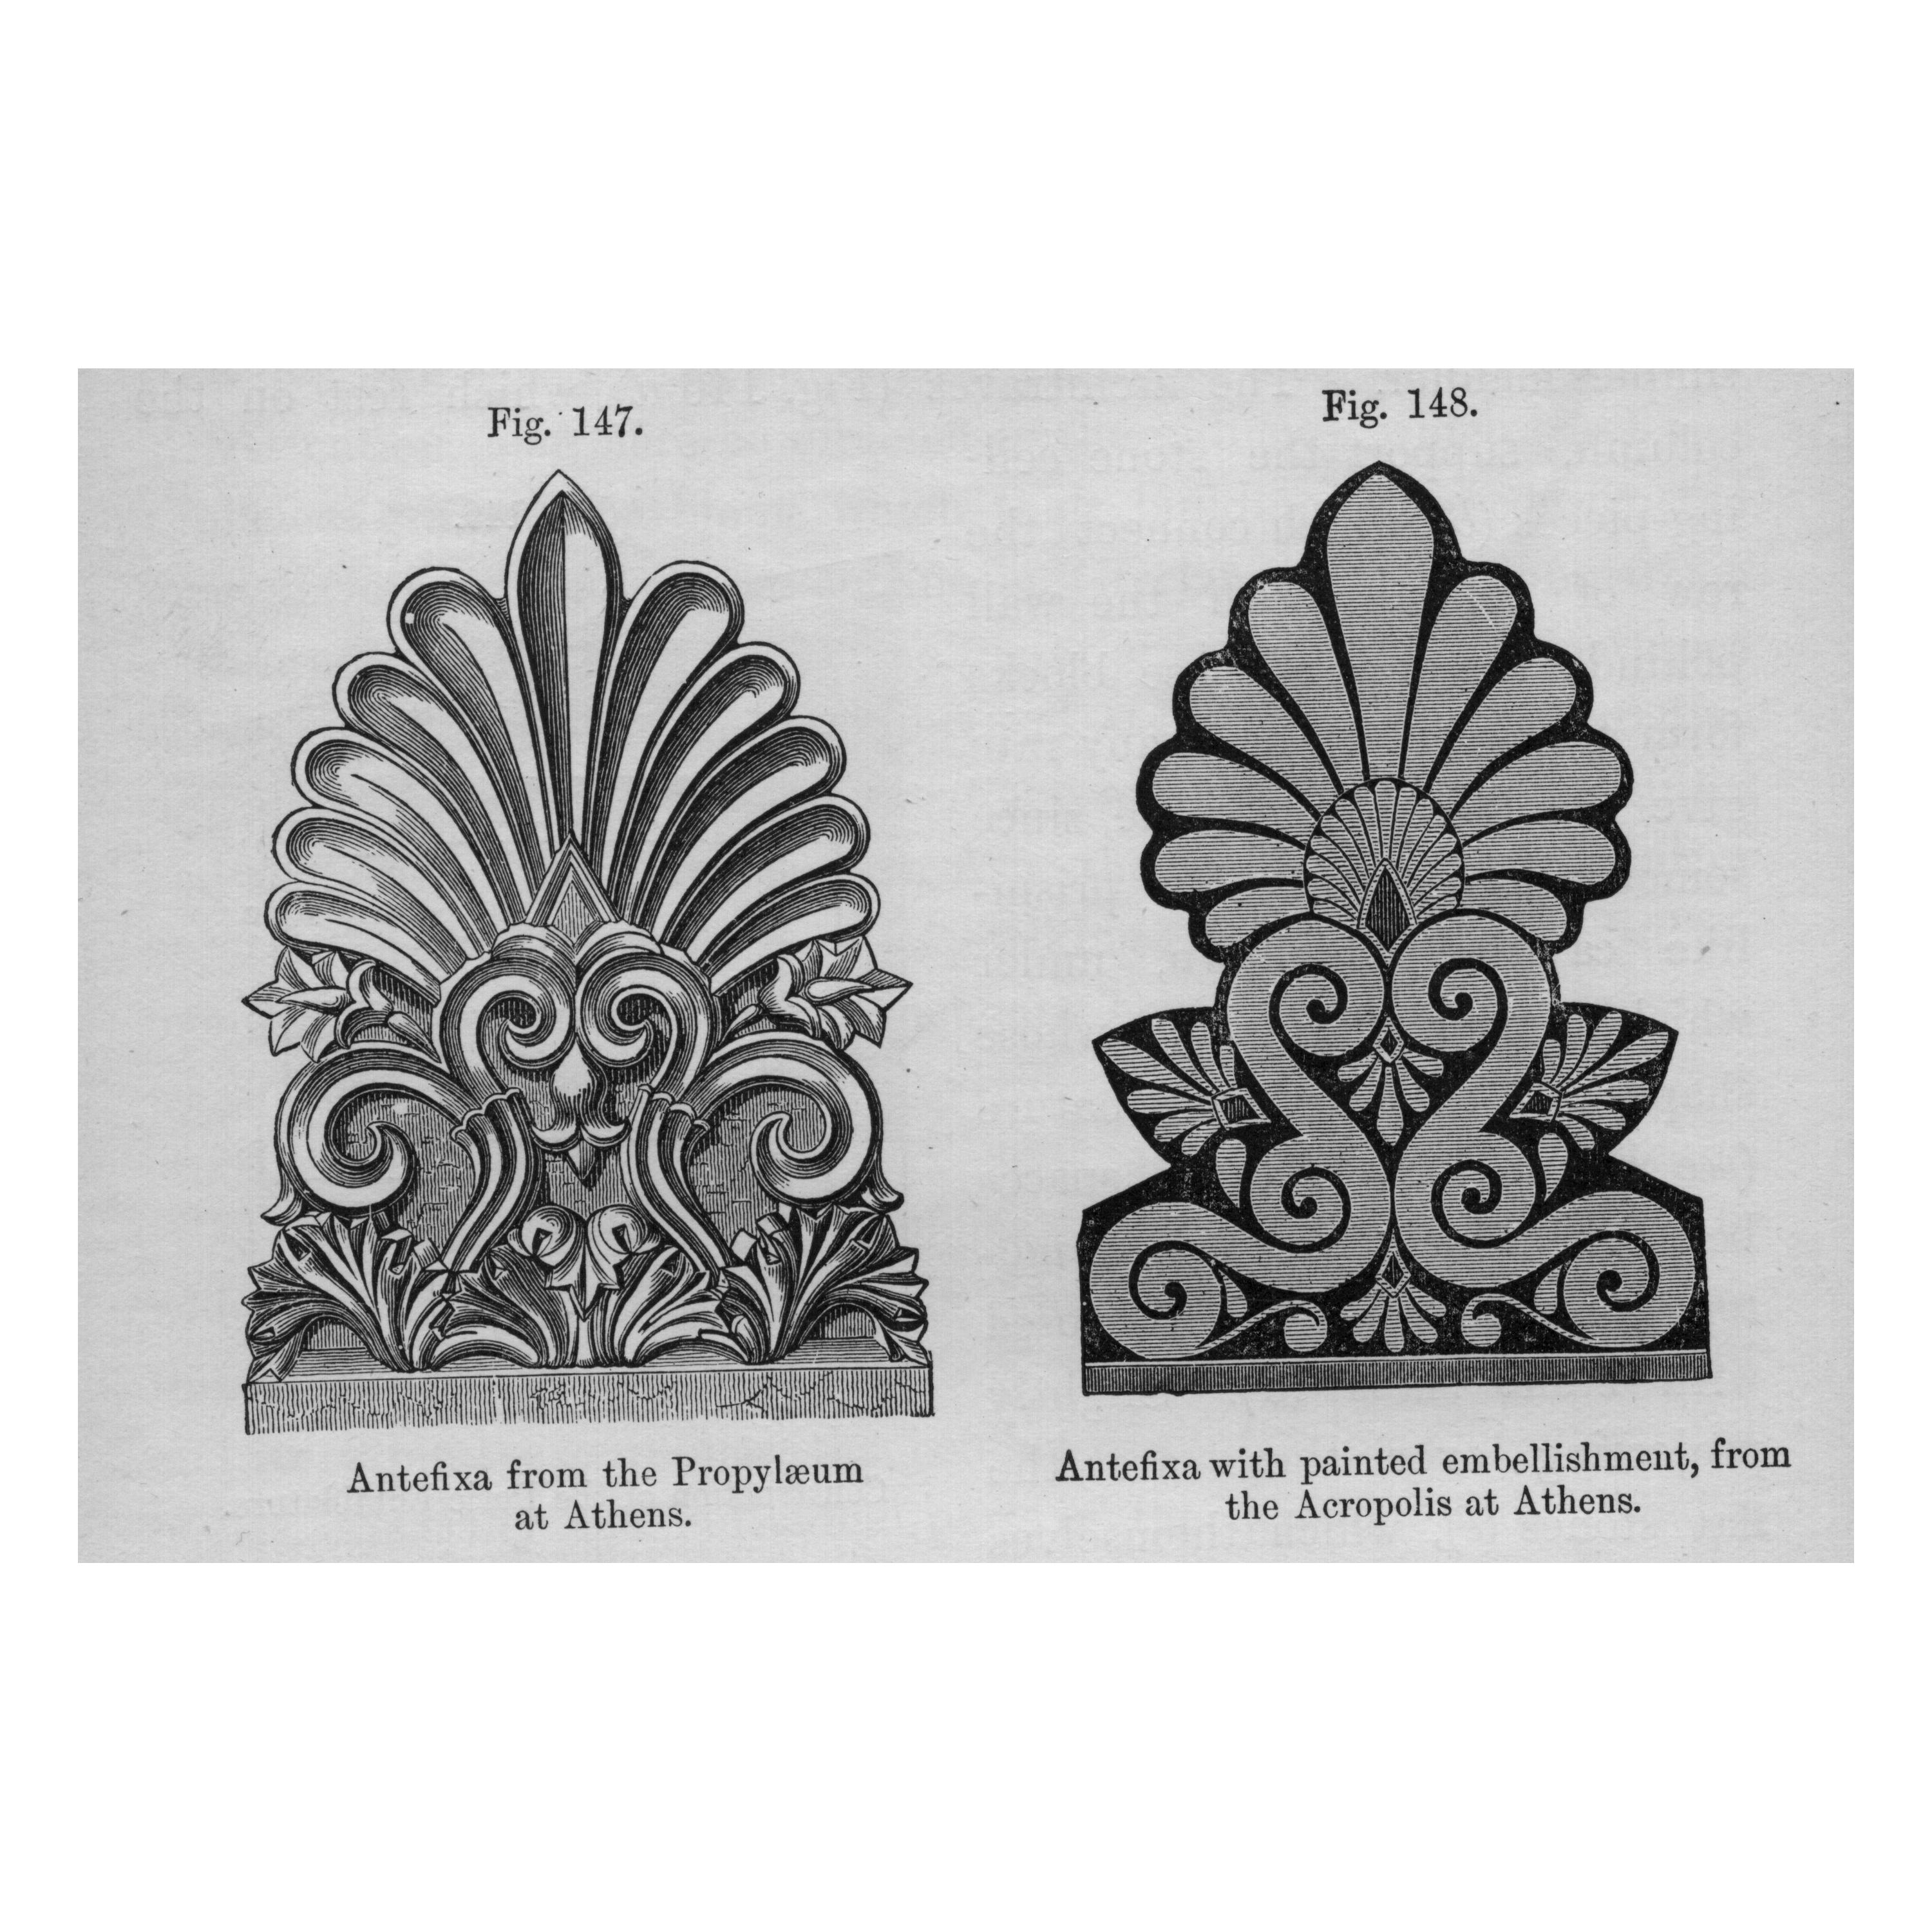 Architectural rendering of Antefix, vertical decorations used to cover the end of roof tiling, often used in Grecian temples.